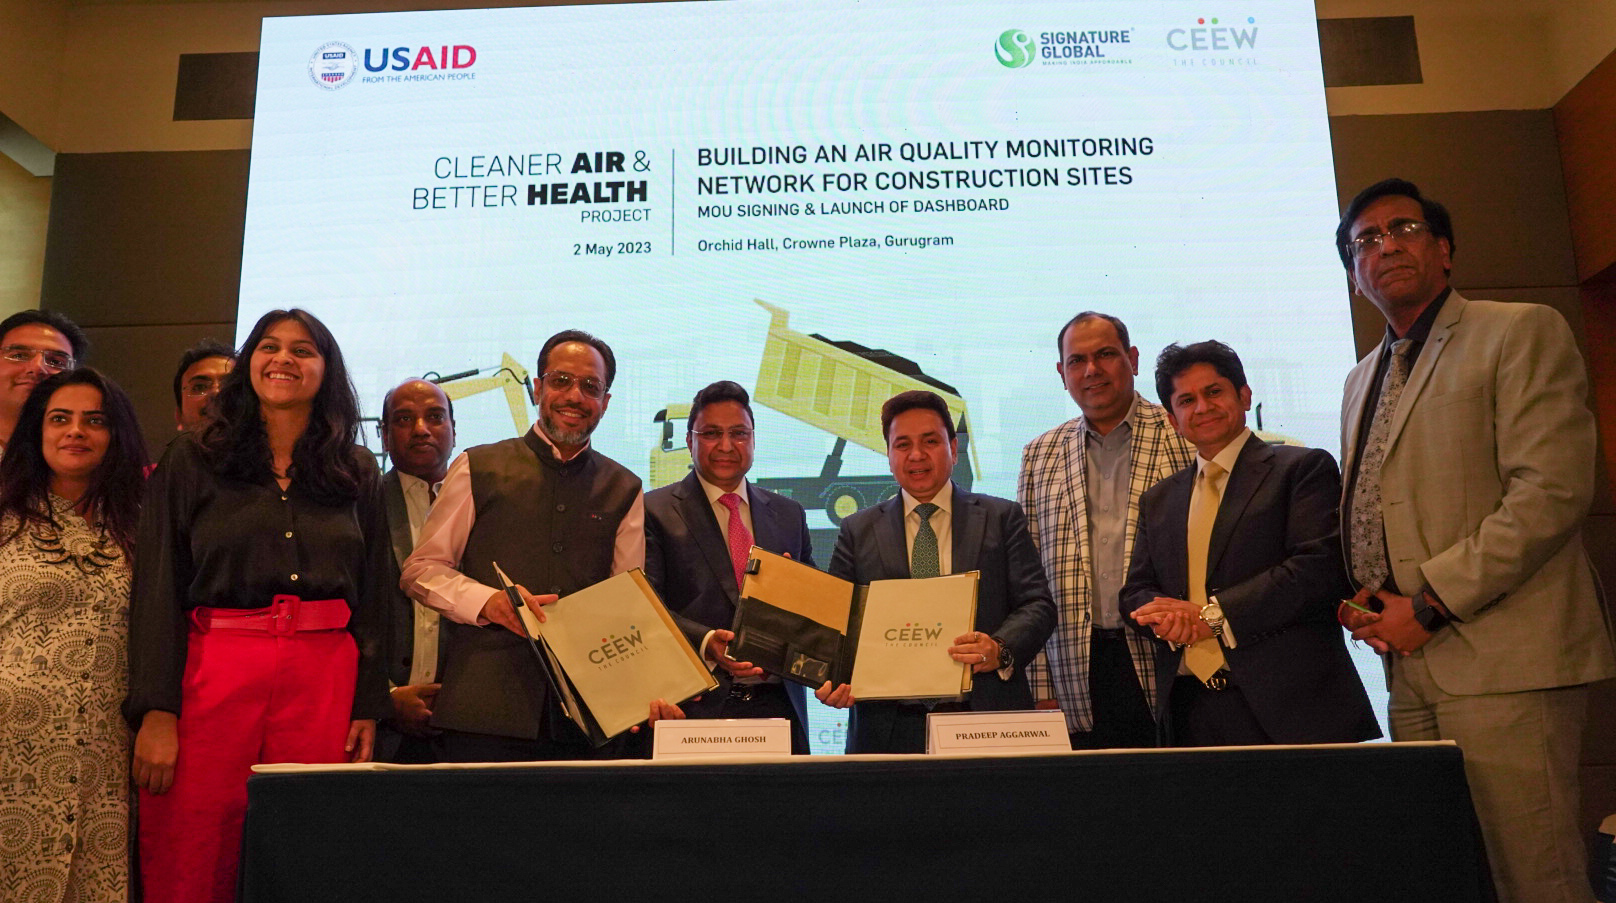 Signature Global signed MOU with CEEW